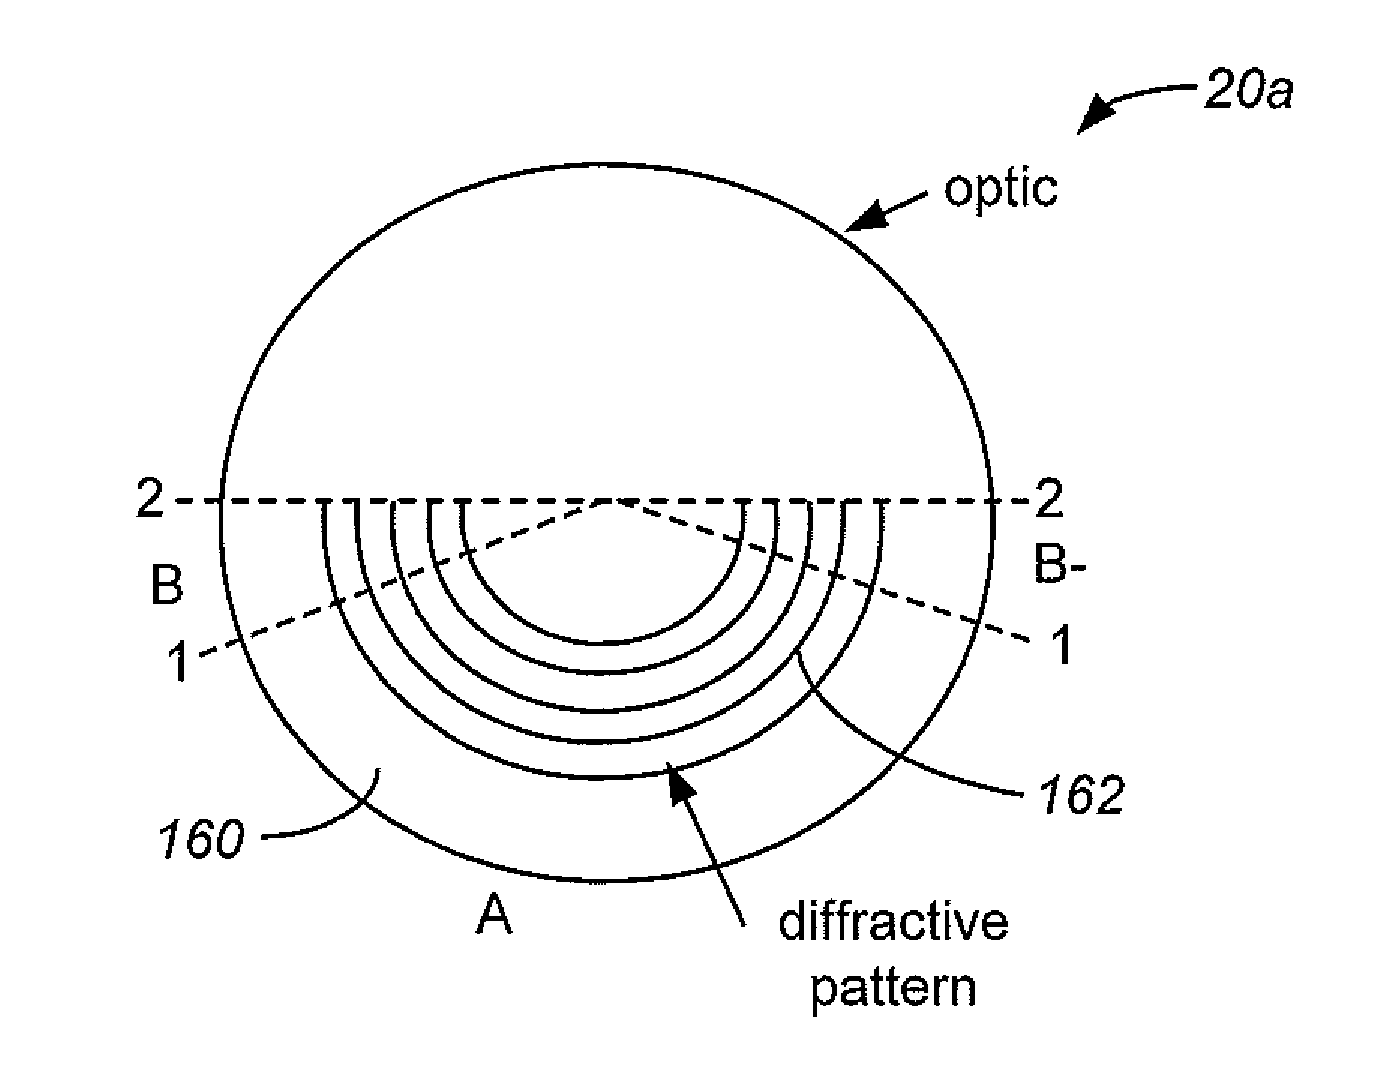 Ophthalmic lens, systems and methods with angular varying phase delay